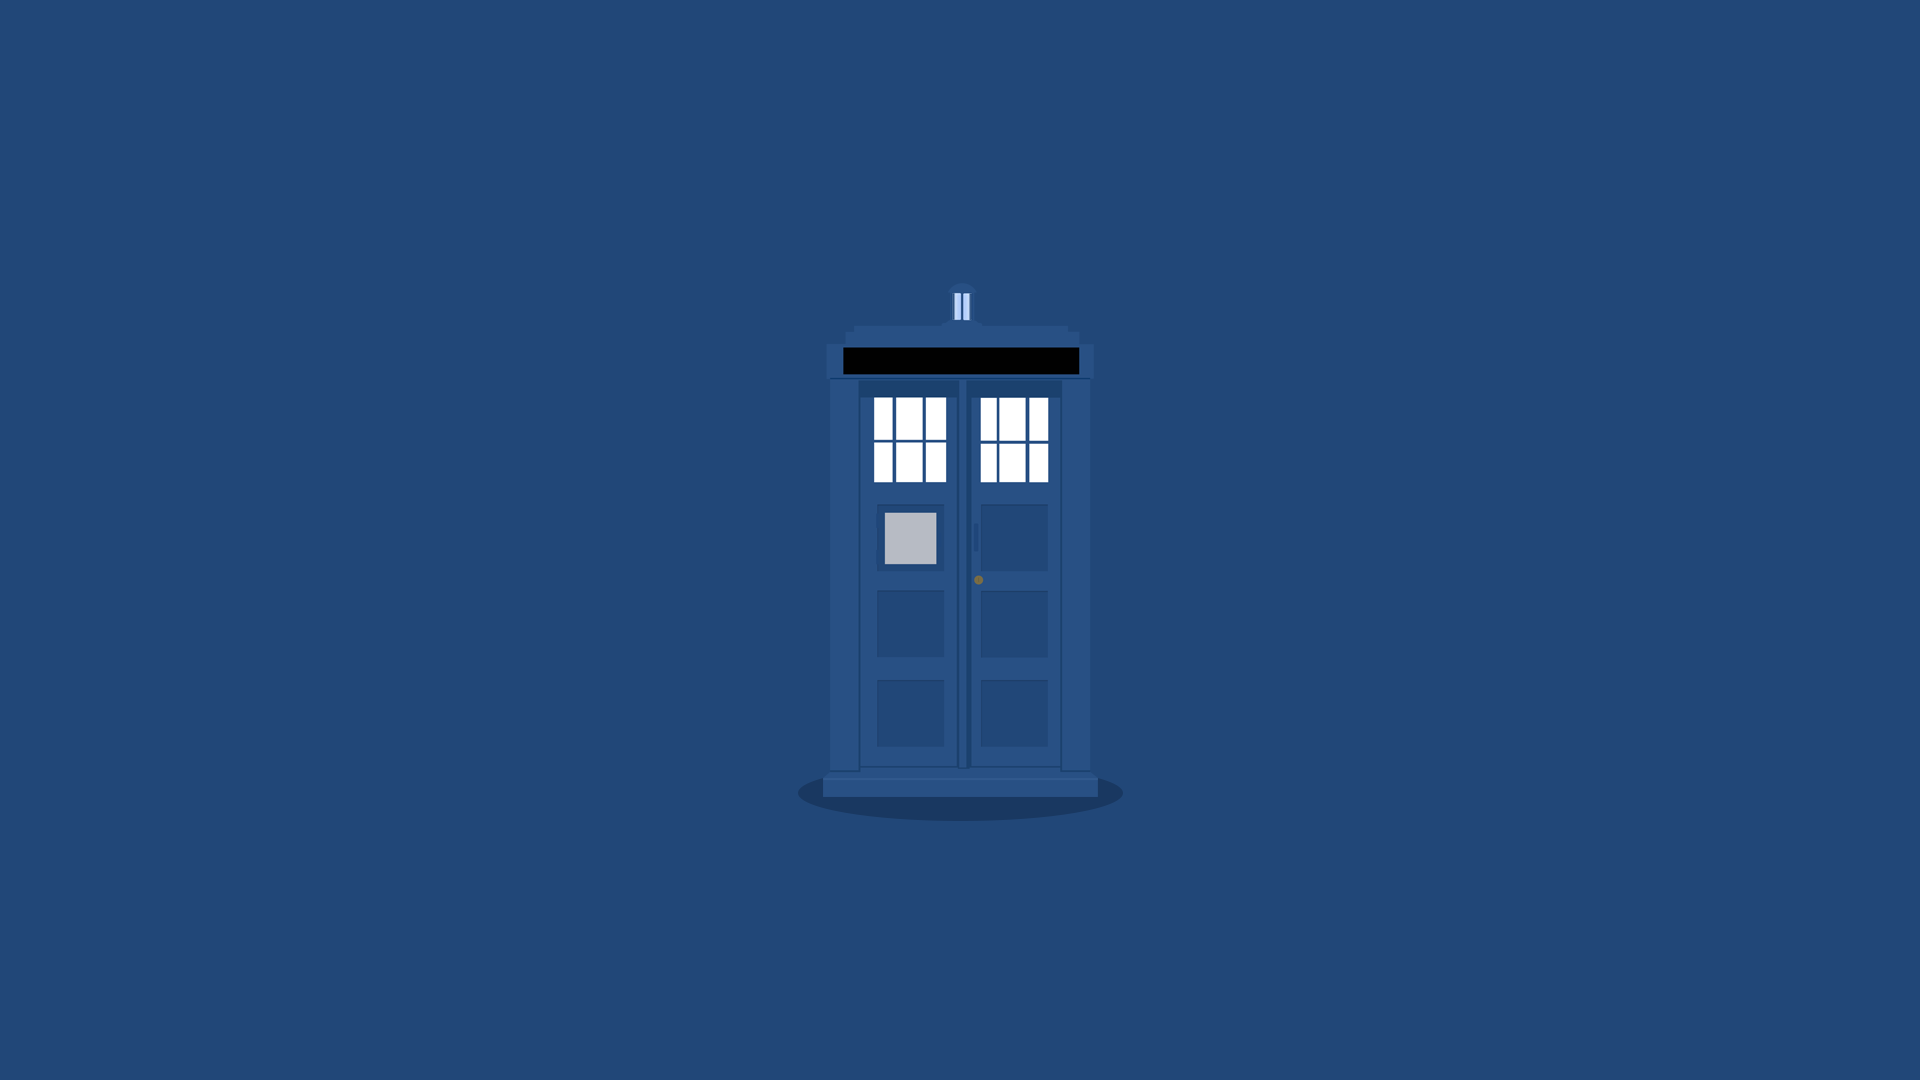 General 1920x1080 police boxes minimalism TARDIS Doctor Who blue blue background TV series simple background science fiction